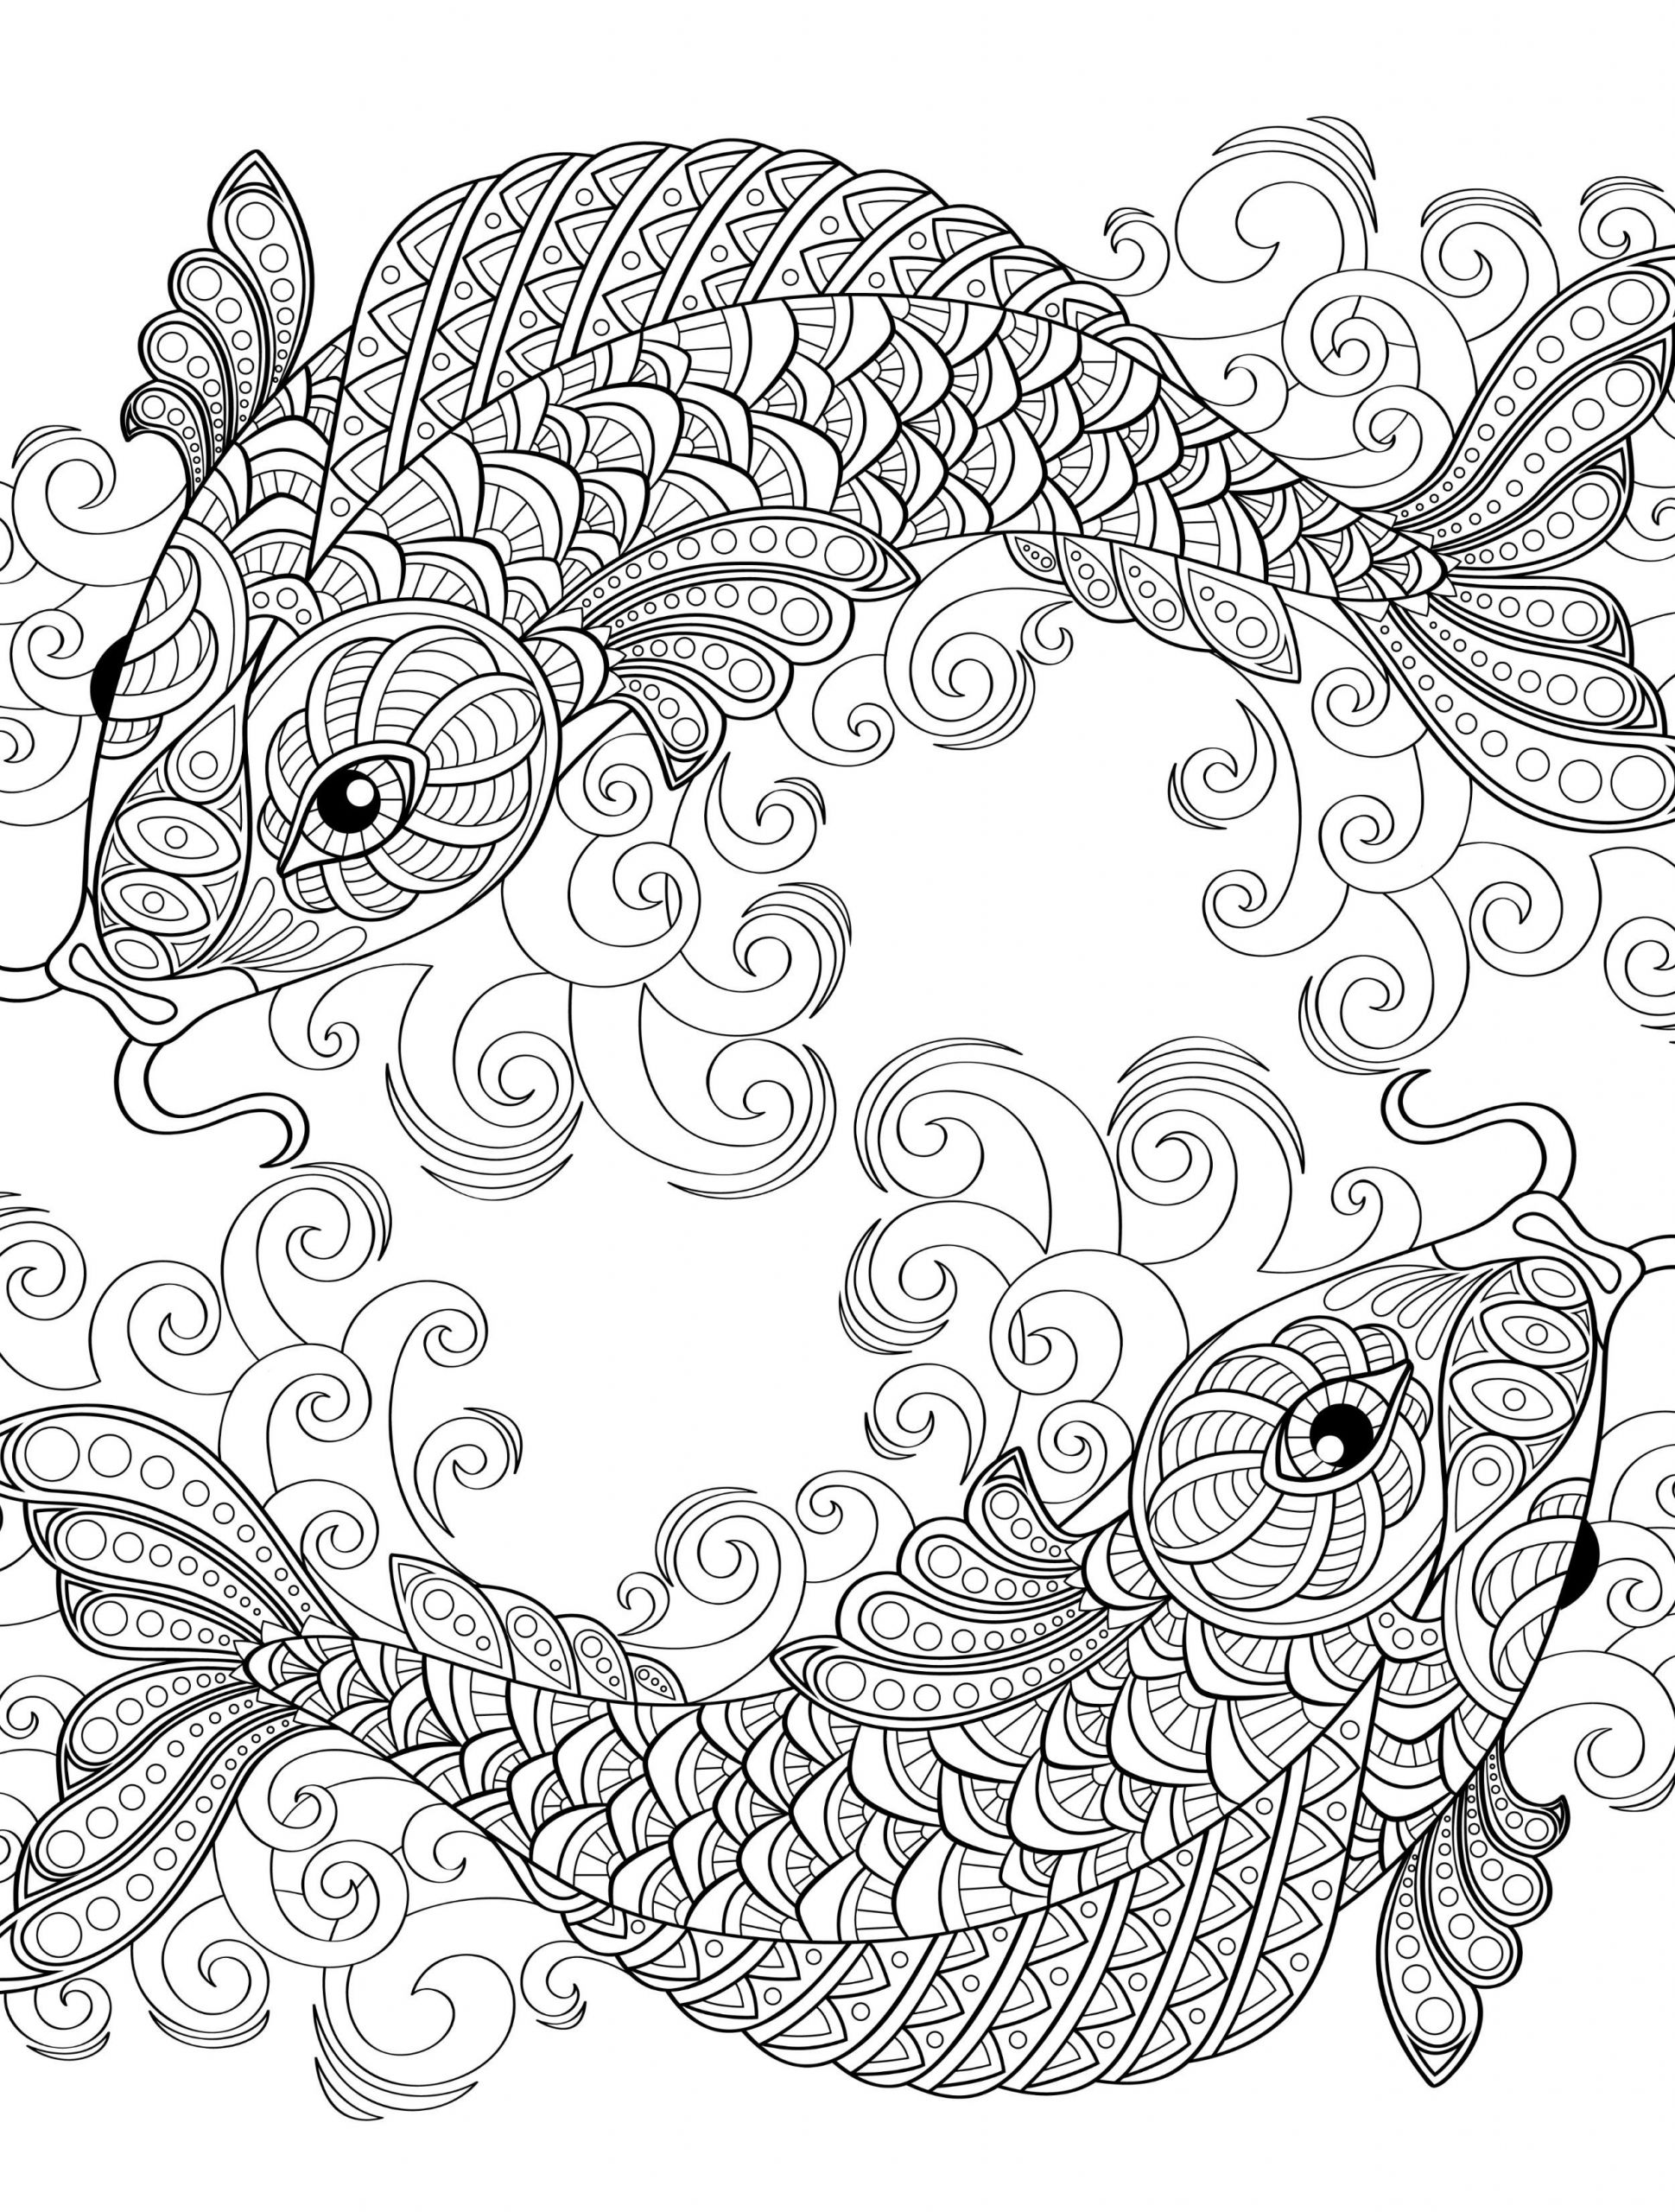 Adult Coloring Pages Free
 Pin on coloring